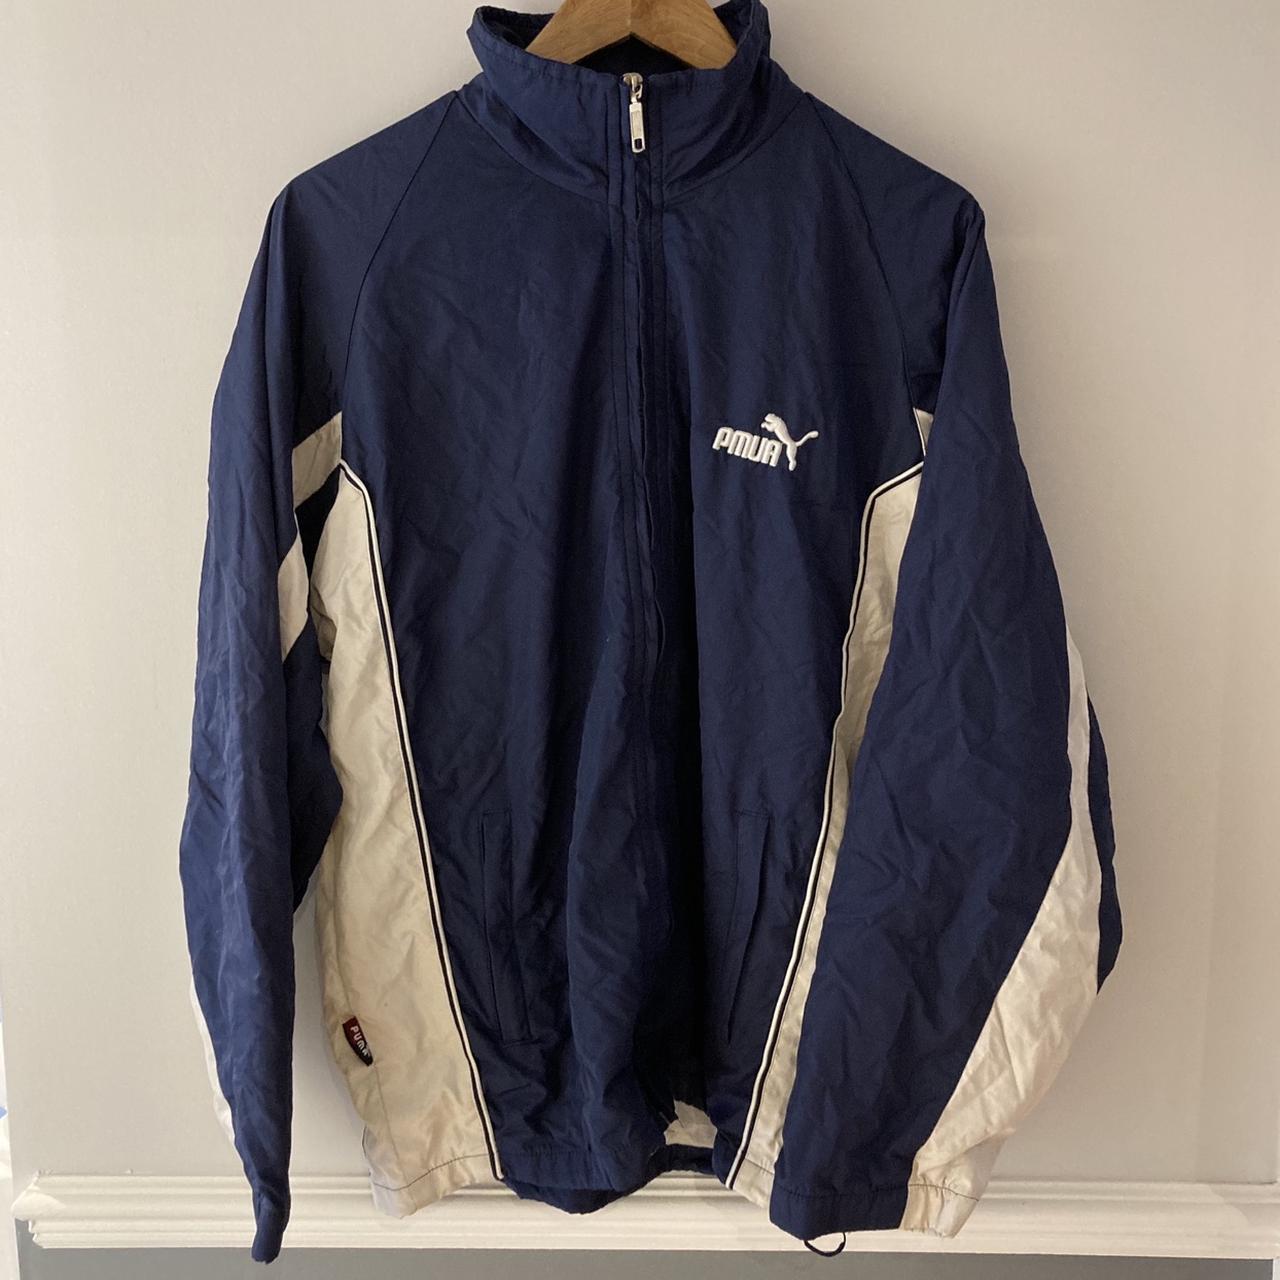 Vintage 90s Puma Track Jacket in Navy with White... - Depop